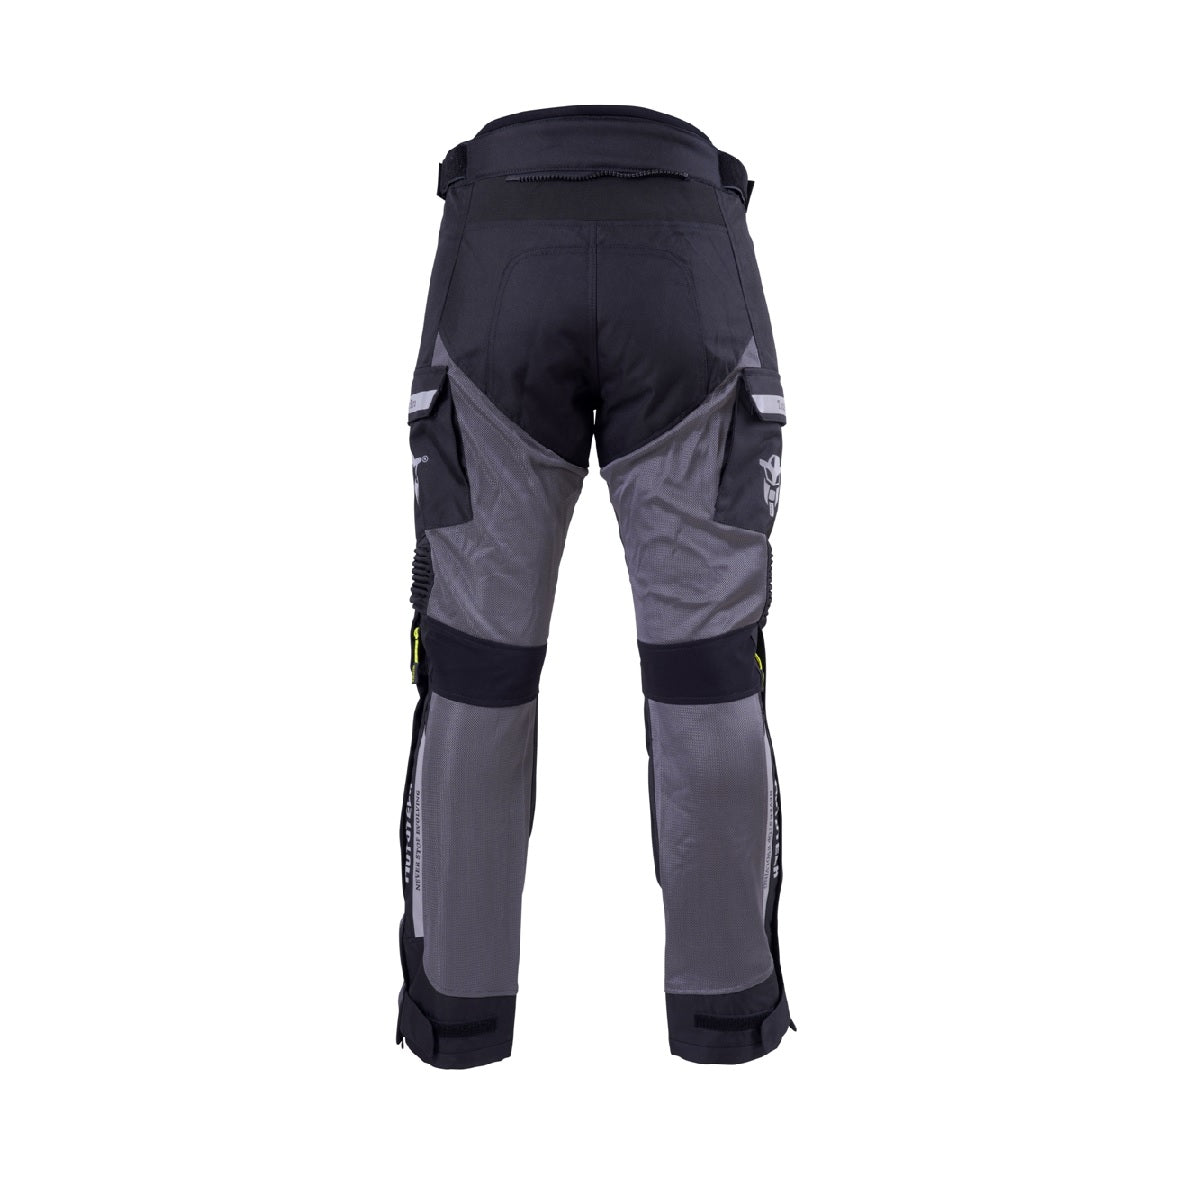 BUY DUHAN Motorcycle Pants Summer Cool Breathable Mesh ON SALE NOW! -  Rugged Motorbike Jeans